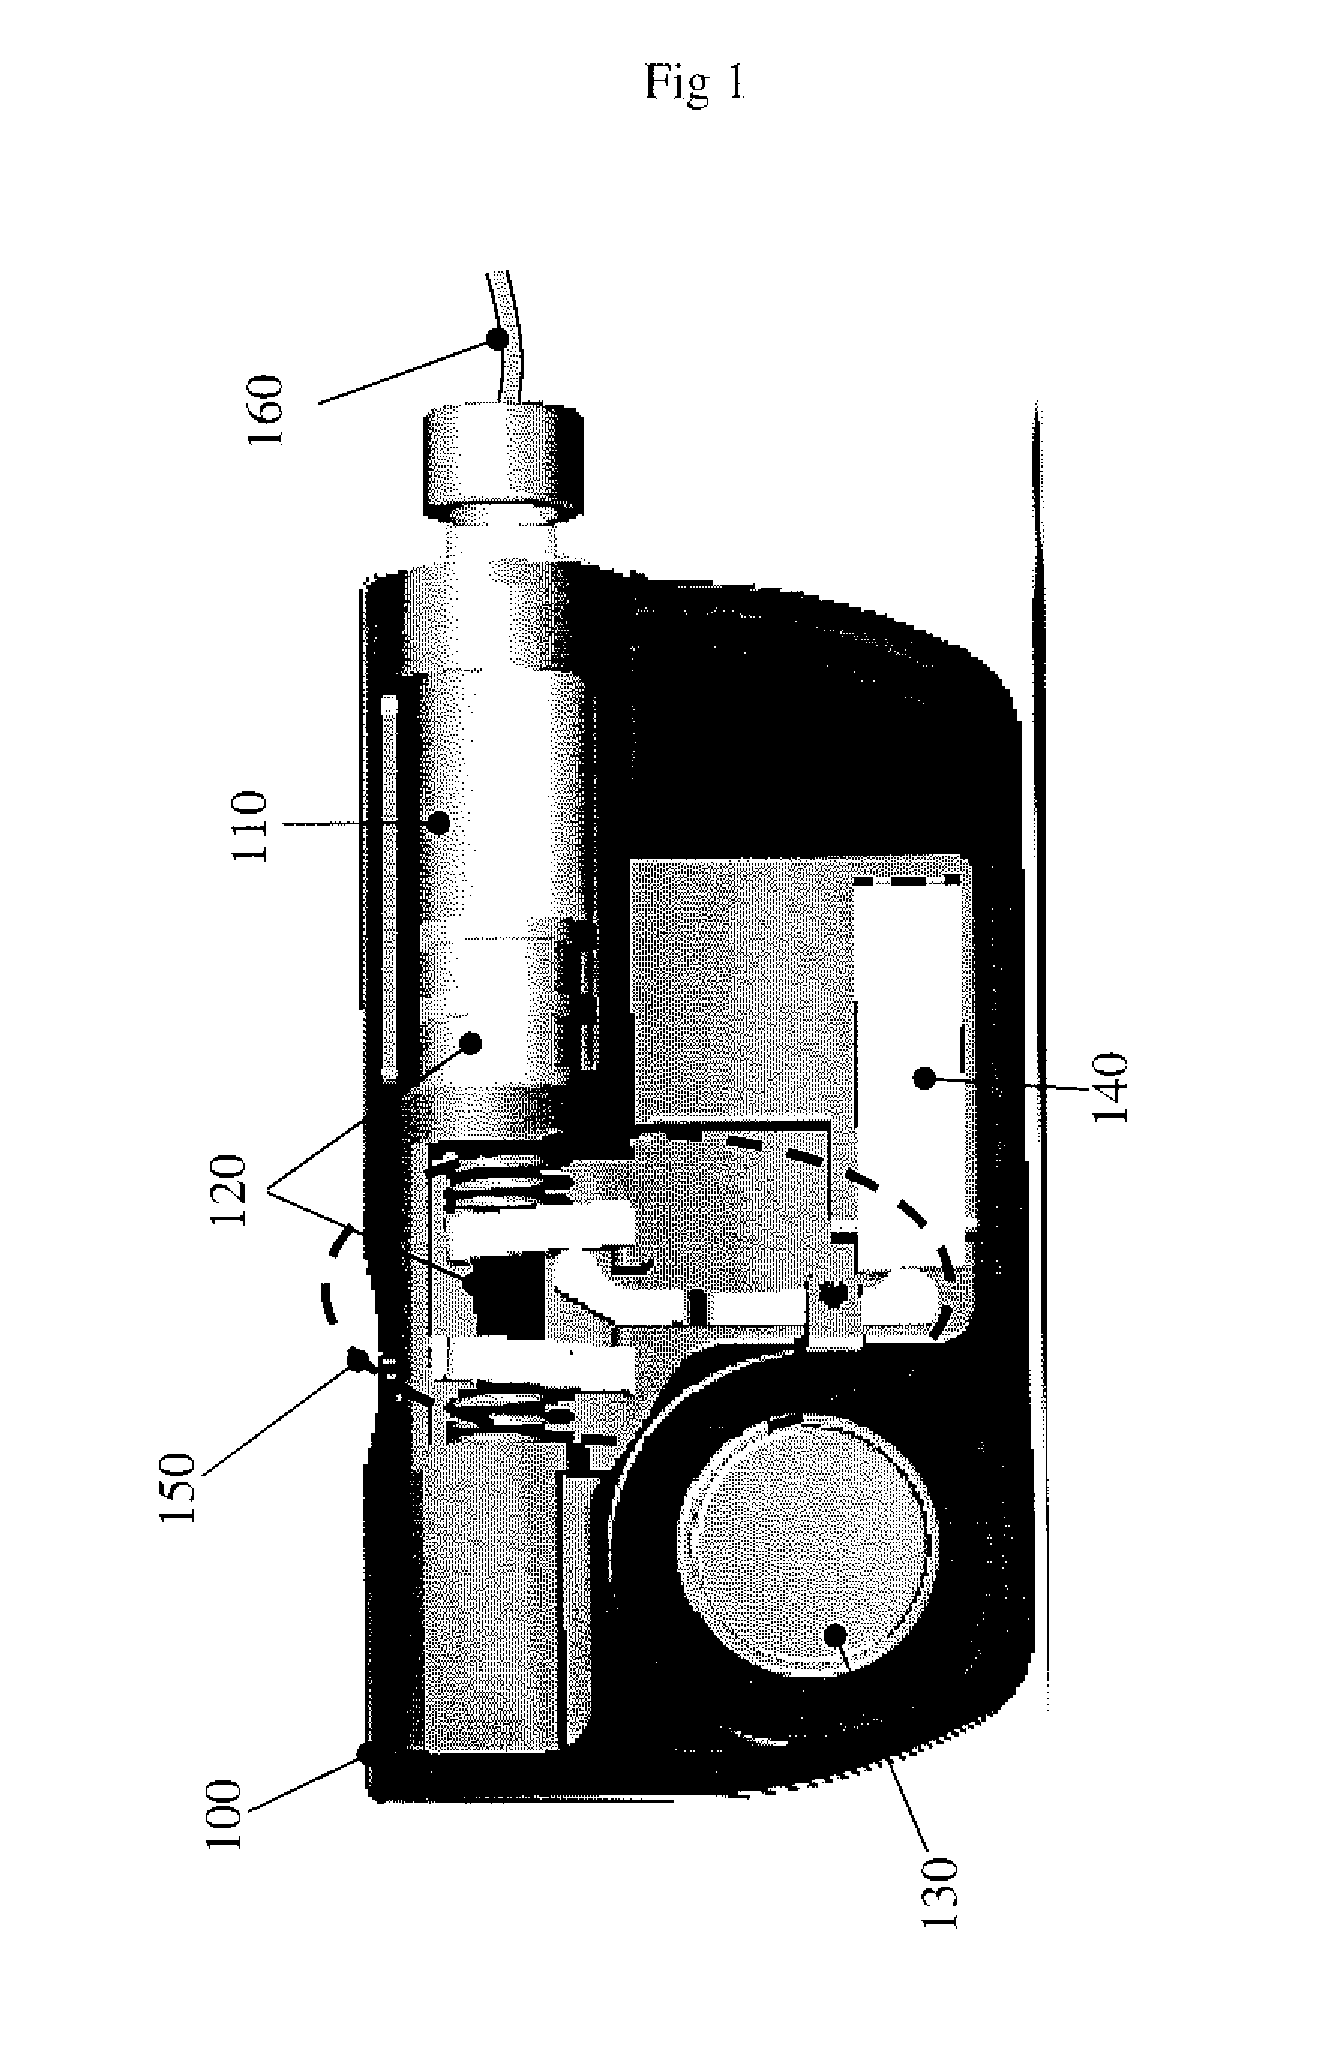 Miniature infusion pump for a controlled delivery of medication